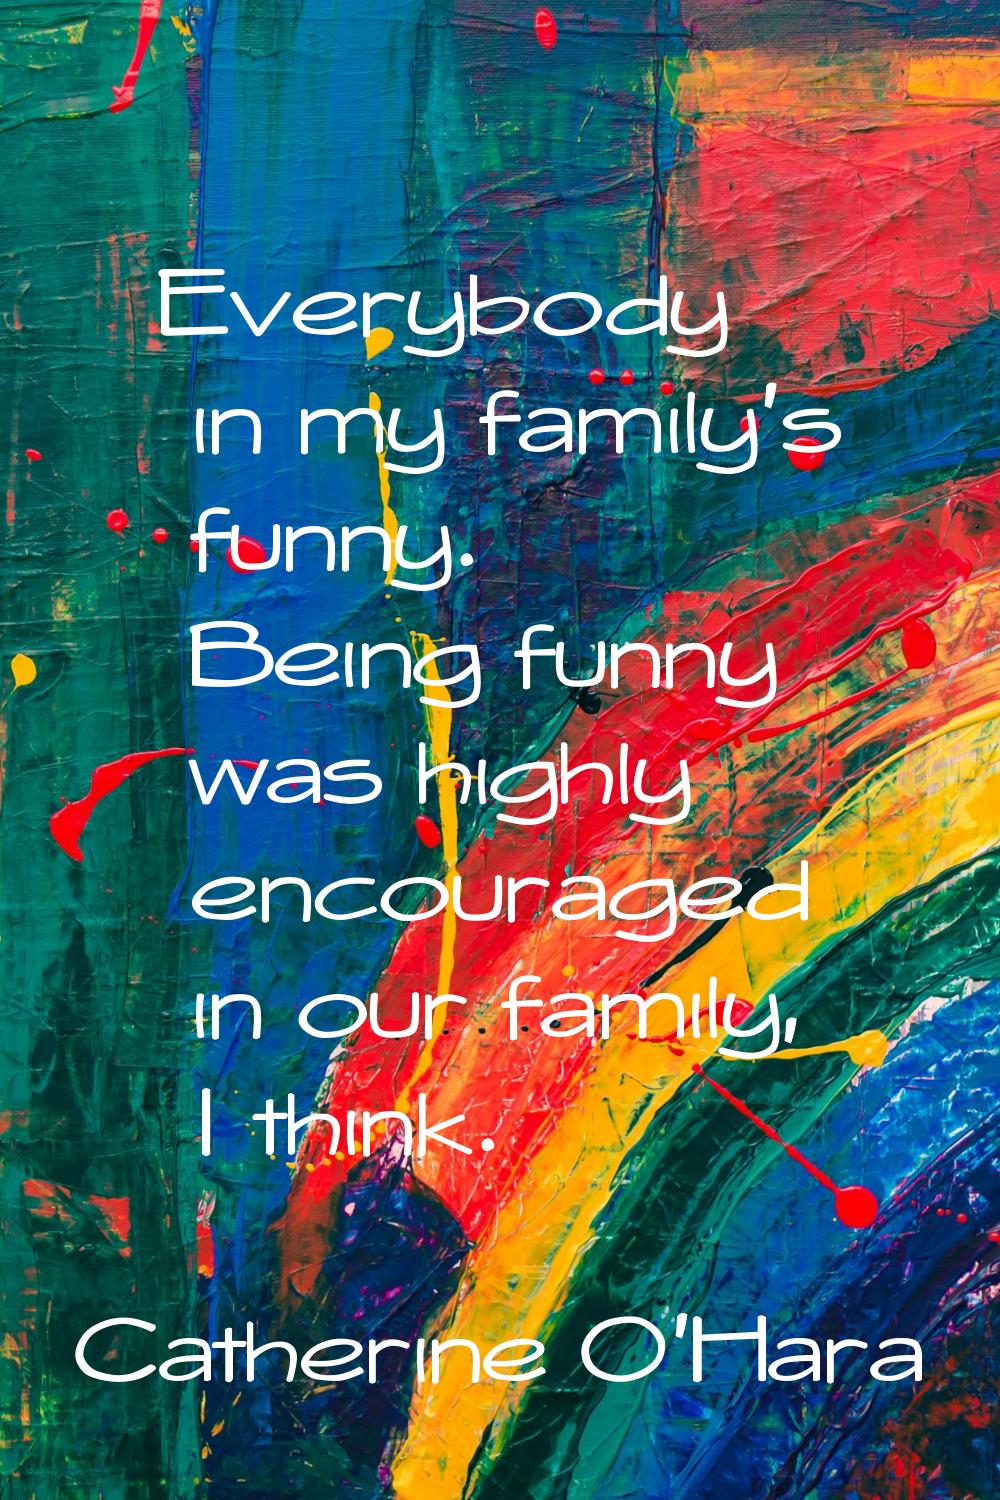 Everybody in my family's funny. Being funny was highly encouraged in our family, I think.